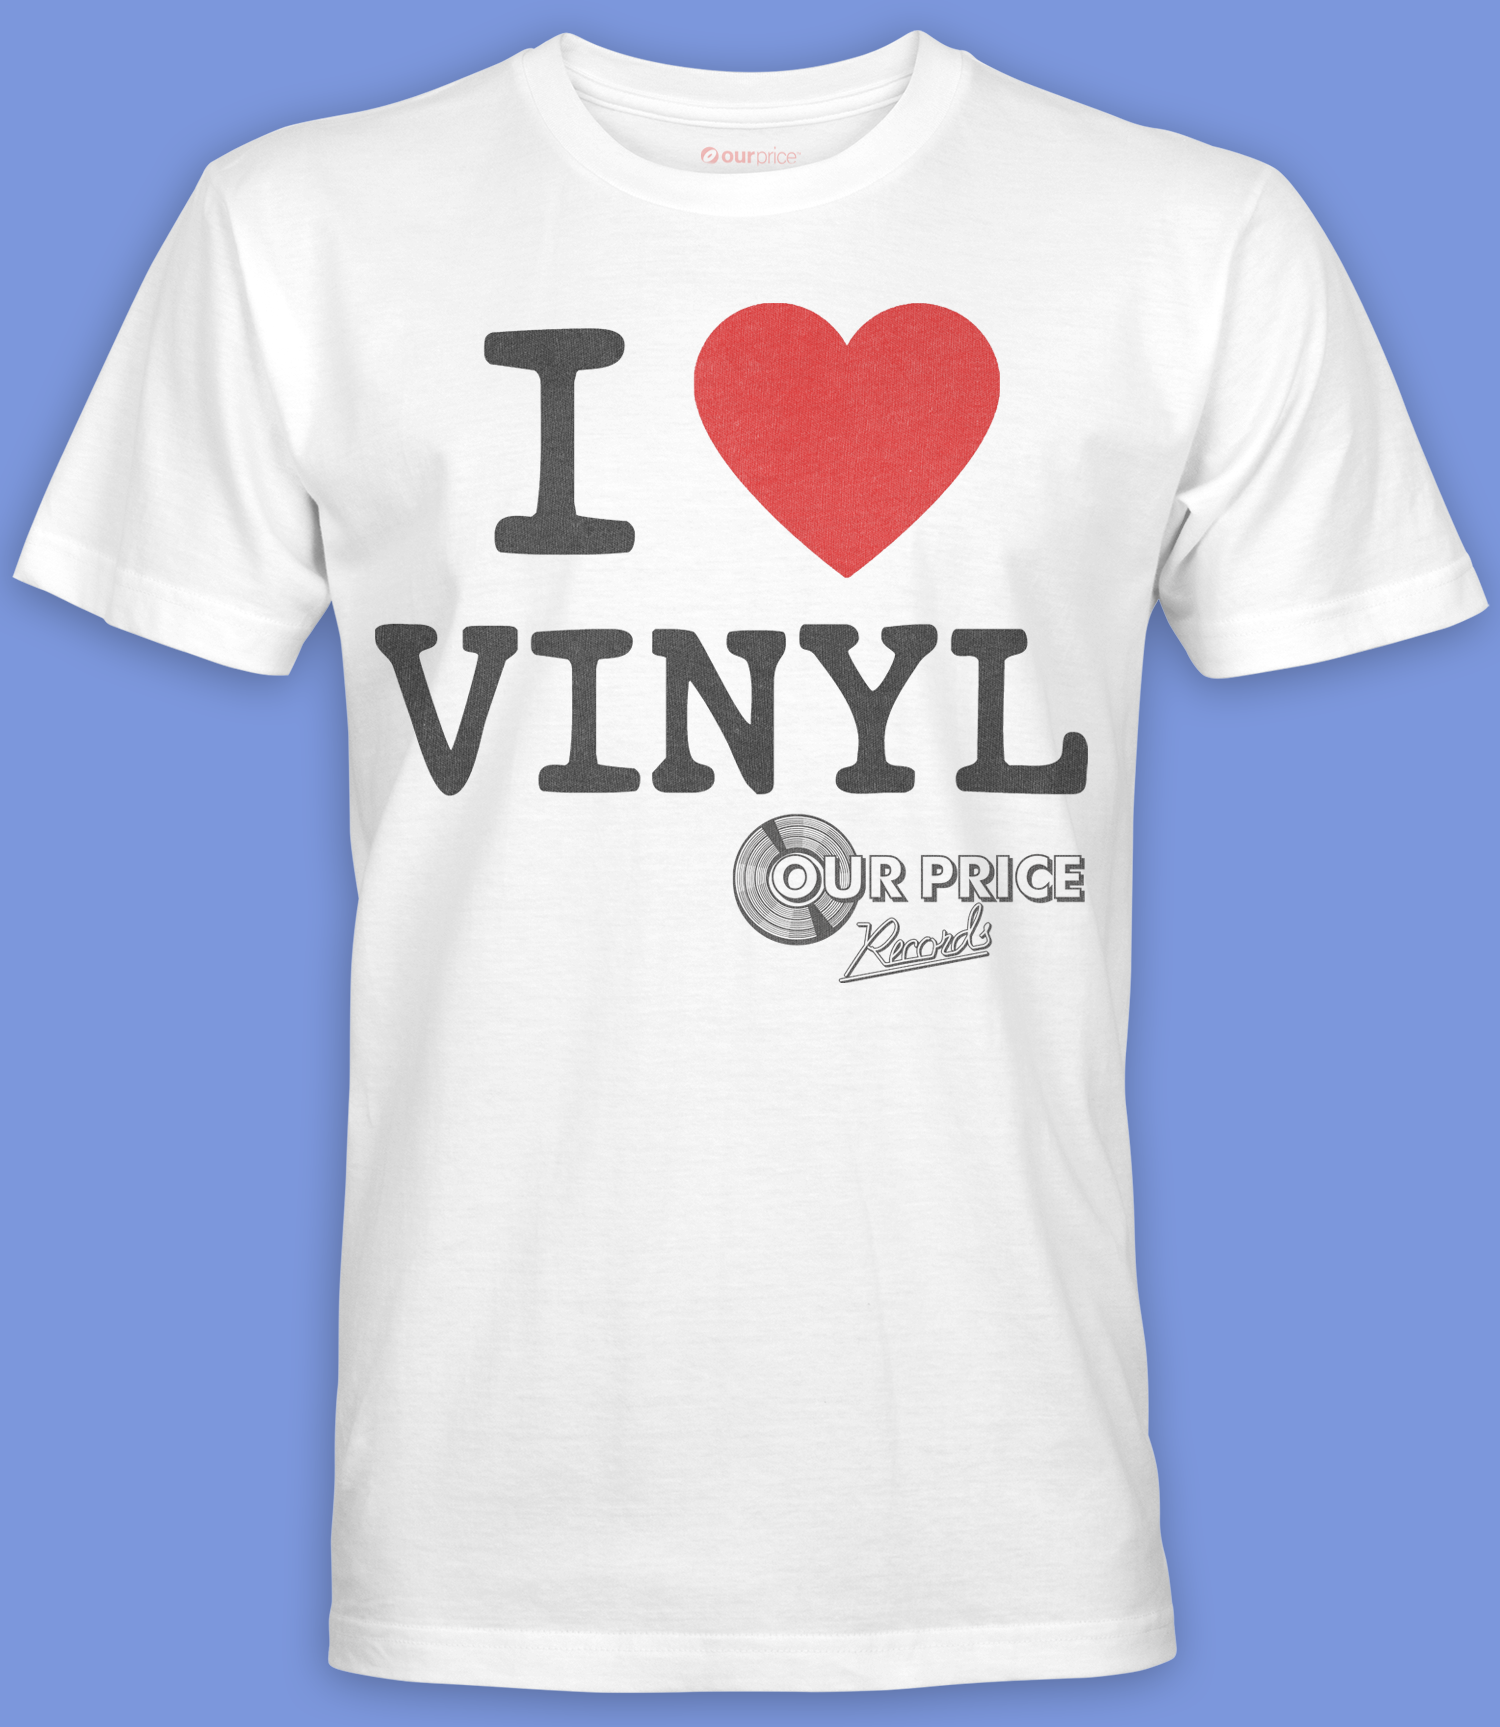 white short sleeve t shirt laying on clear backdrop featuring retro style I Heart Vinyl text in black and heart in red with our price records logo below